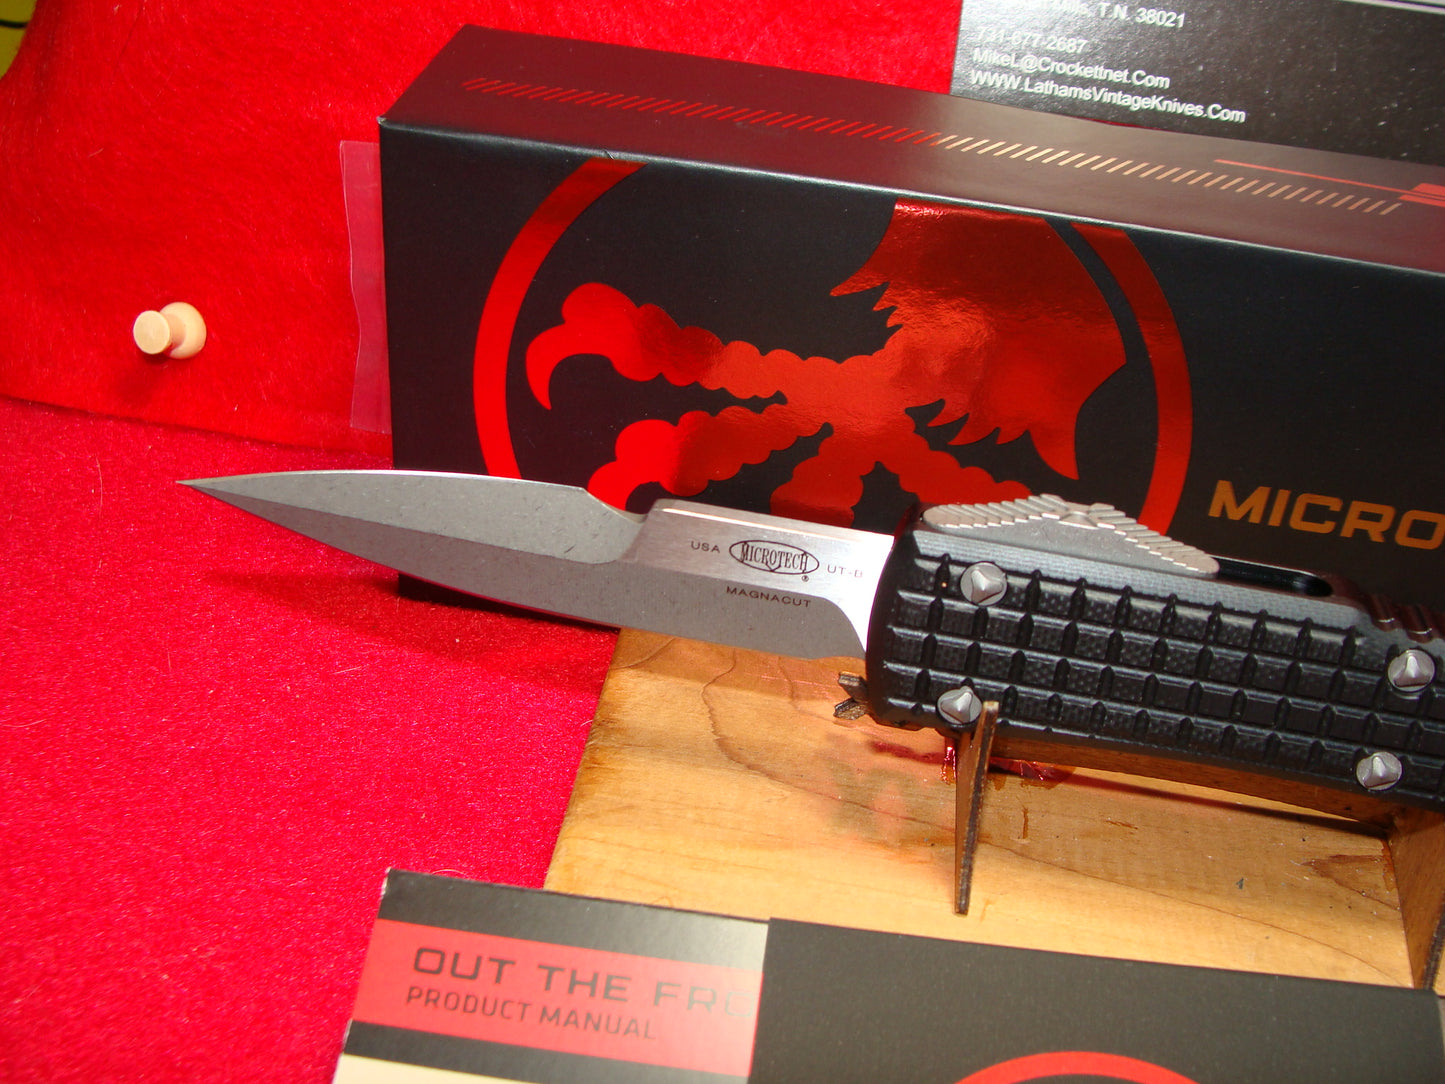 MICROTECH ULTRATECH BAYONET BLADE SHOW 2023 BLACK FRAG G-10 TOP OTF TACTICAL AUTOMATIC KNIFE BLACK HANDLES